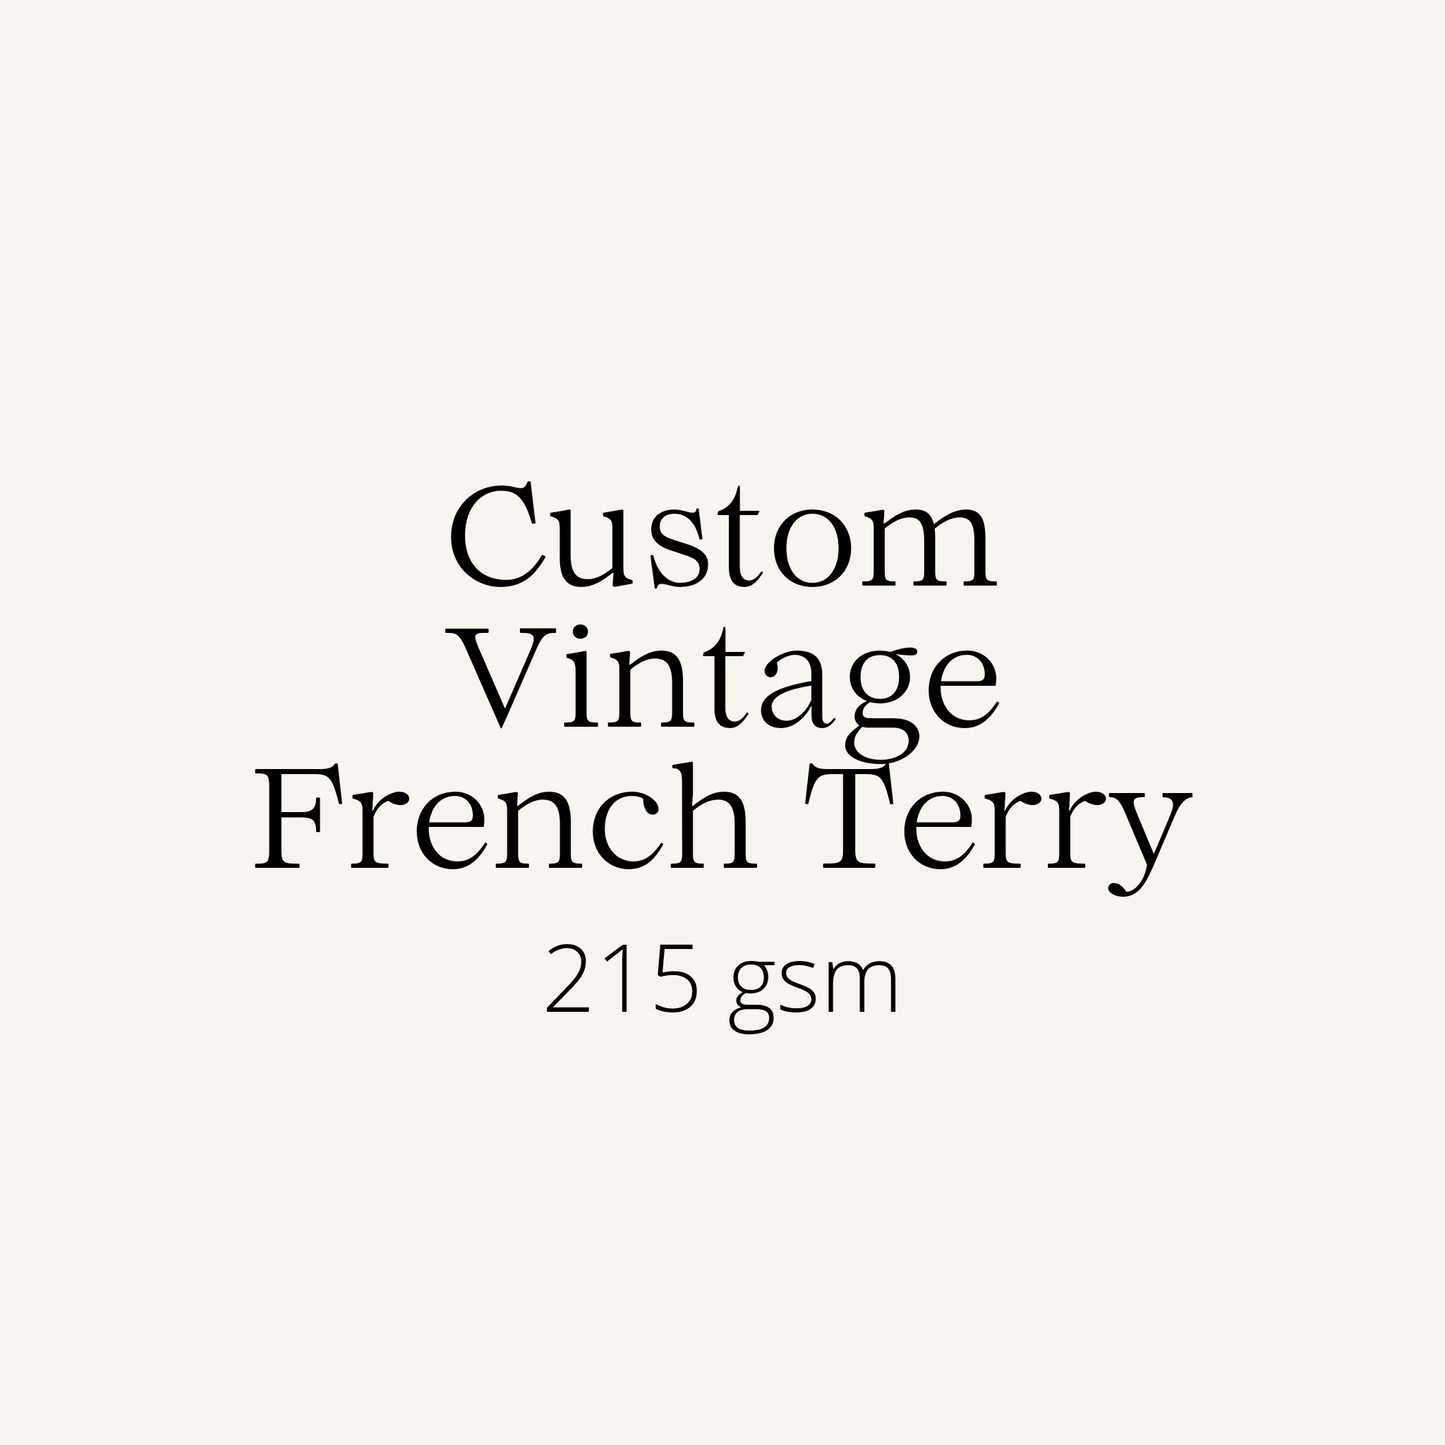 Custom Vintage French Terry